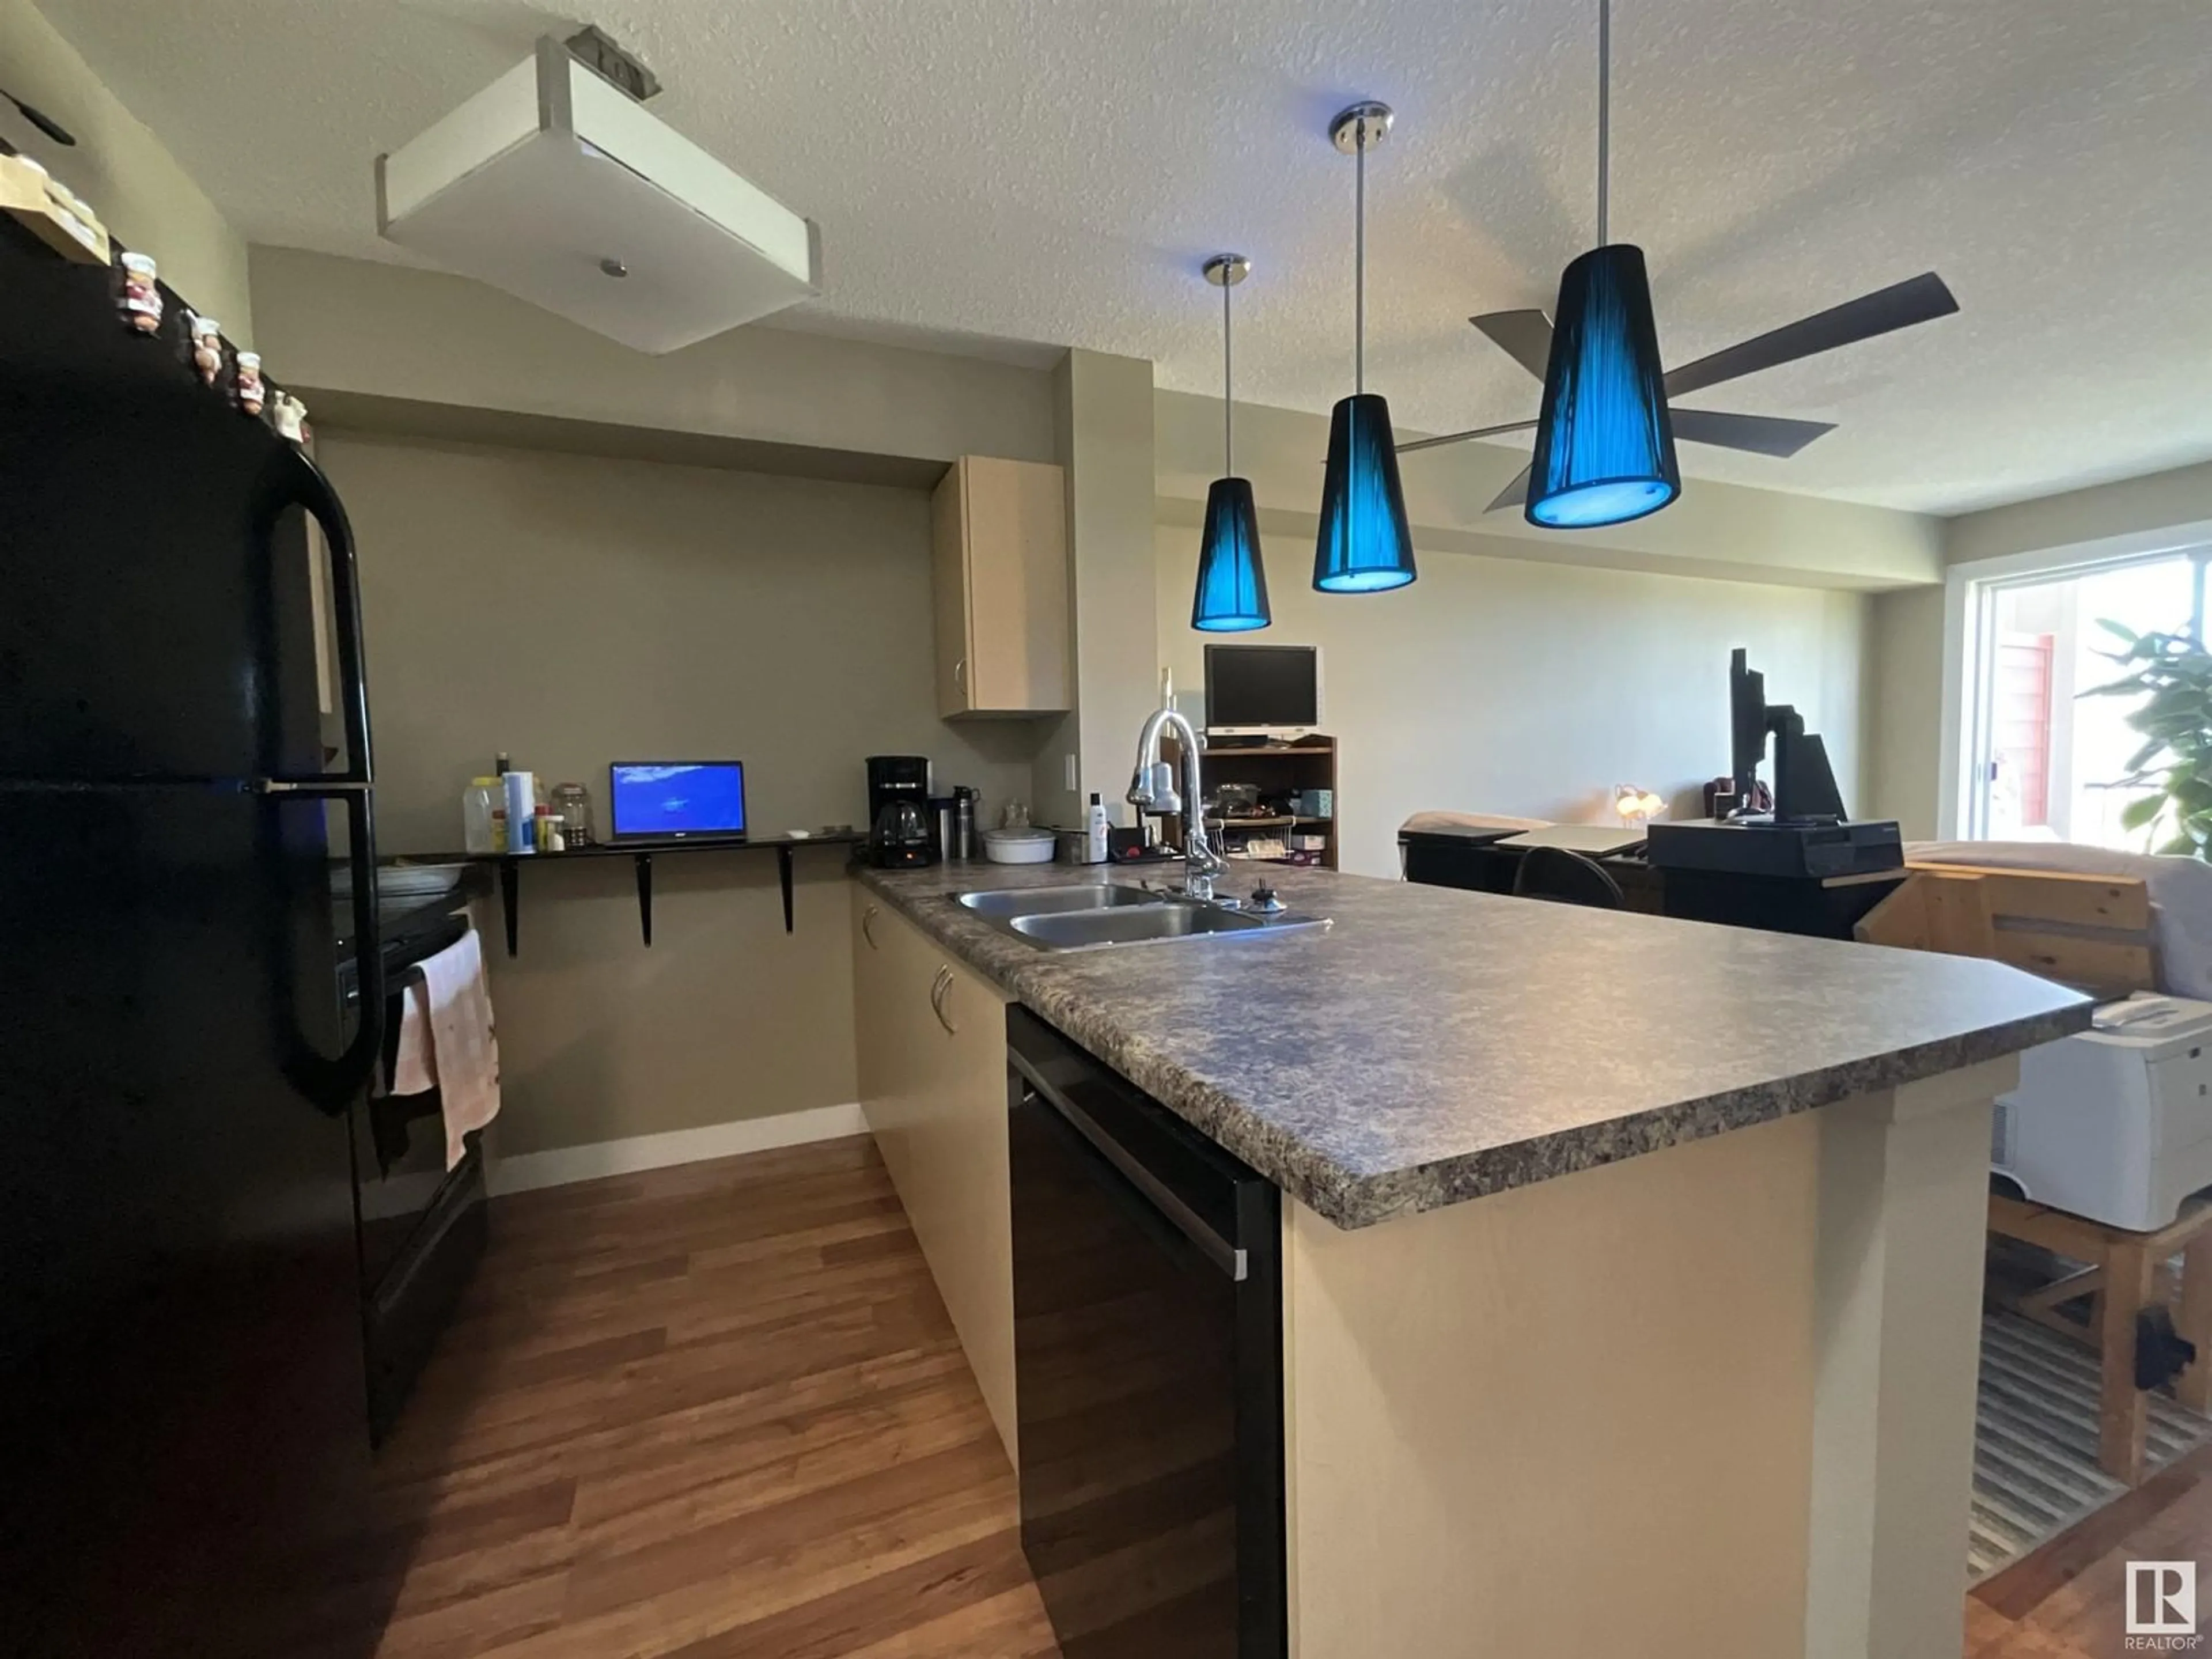 Contemporary kitchen for #406 920 156 ST NW, Edmonton Alberta T6R0N6